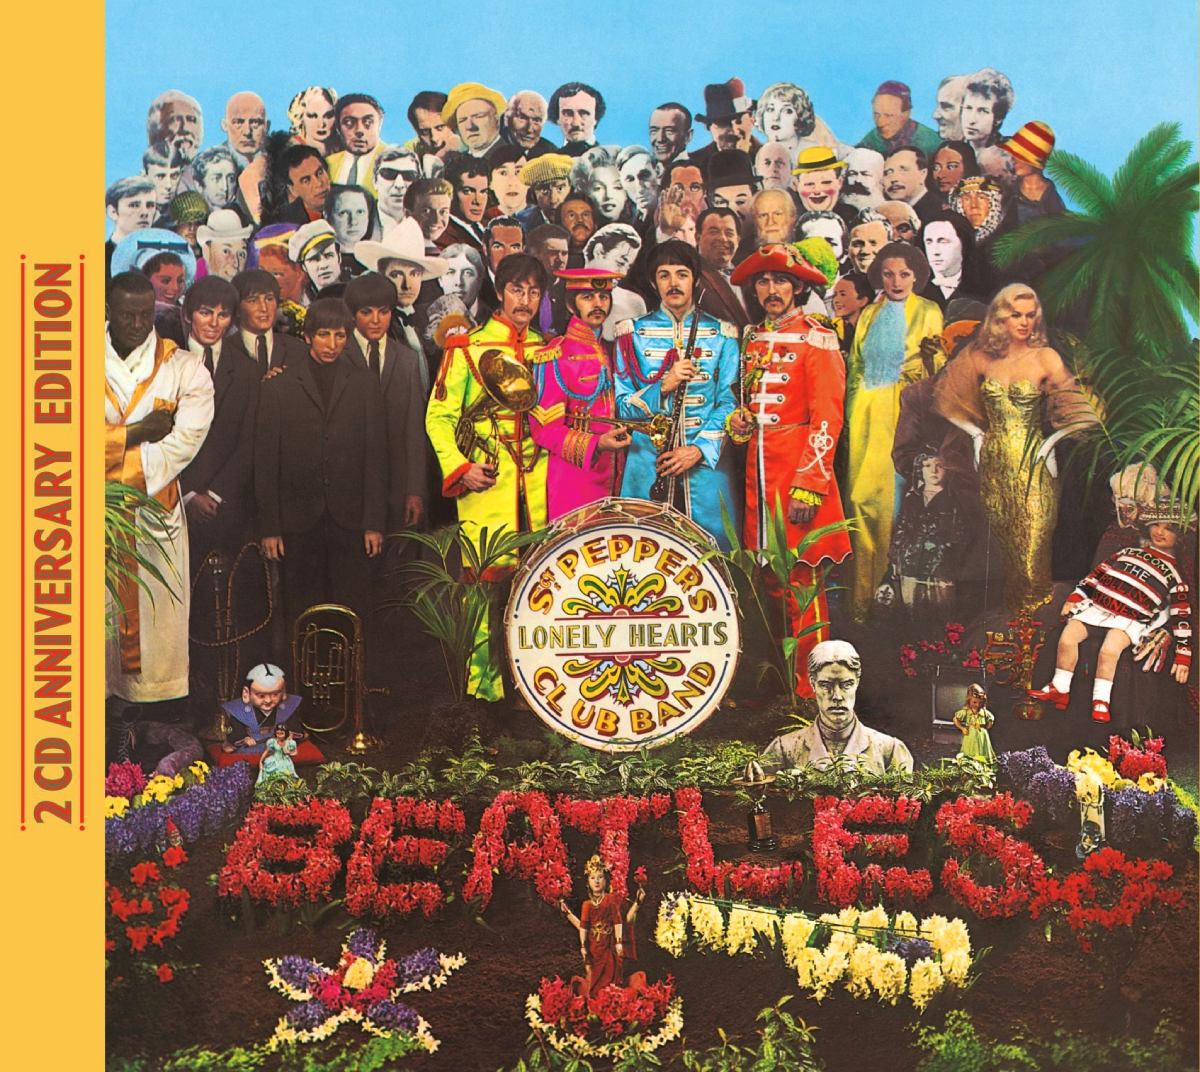 Sgt. Pepper's Lonely Hearts Club Band (Album der Beatles)